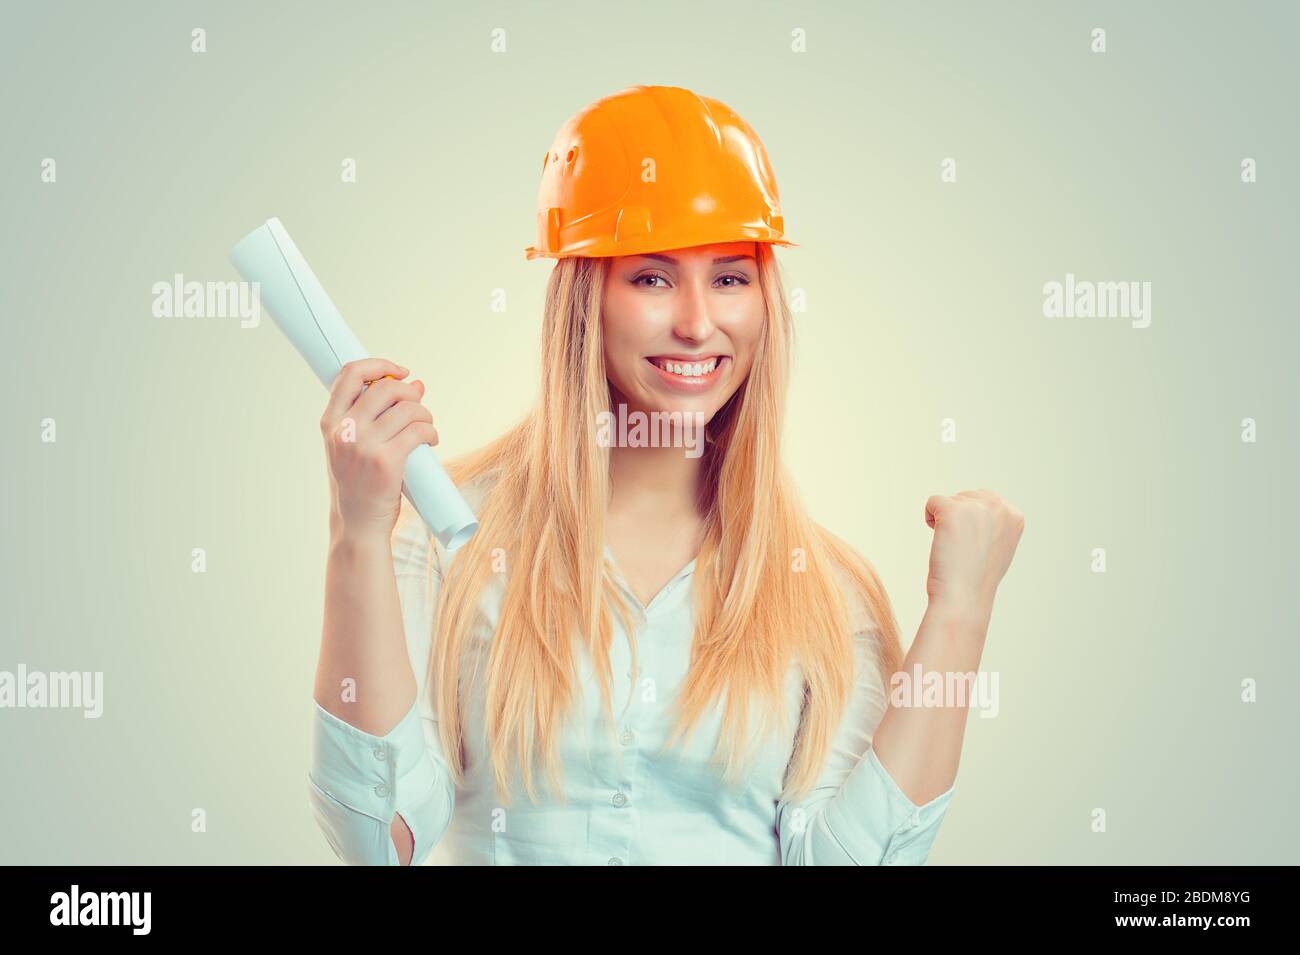 Architect successful. Closeup portrait happy smiling young construction woman yellow cap thumbs arm fist up celebrating win isolated green background. Stock Photo